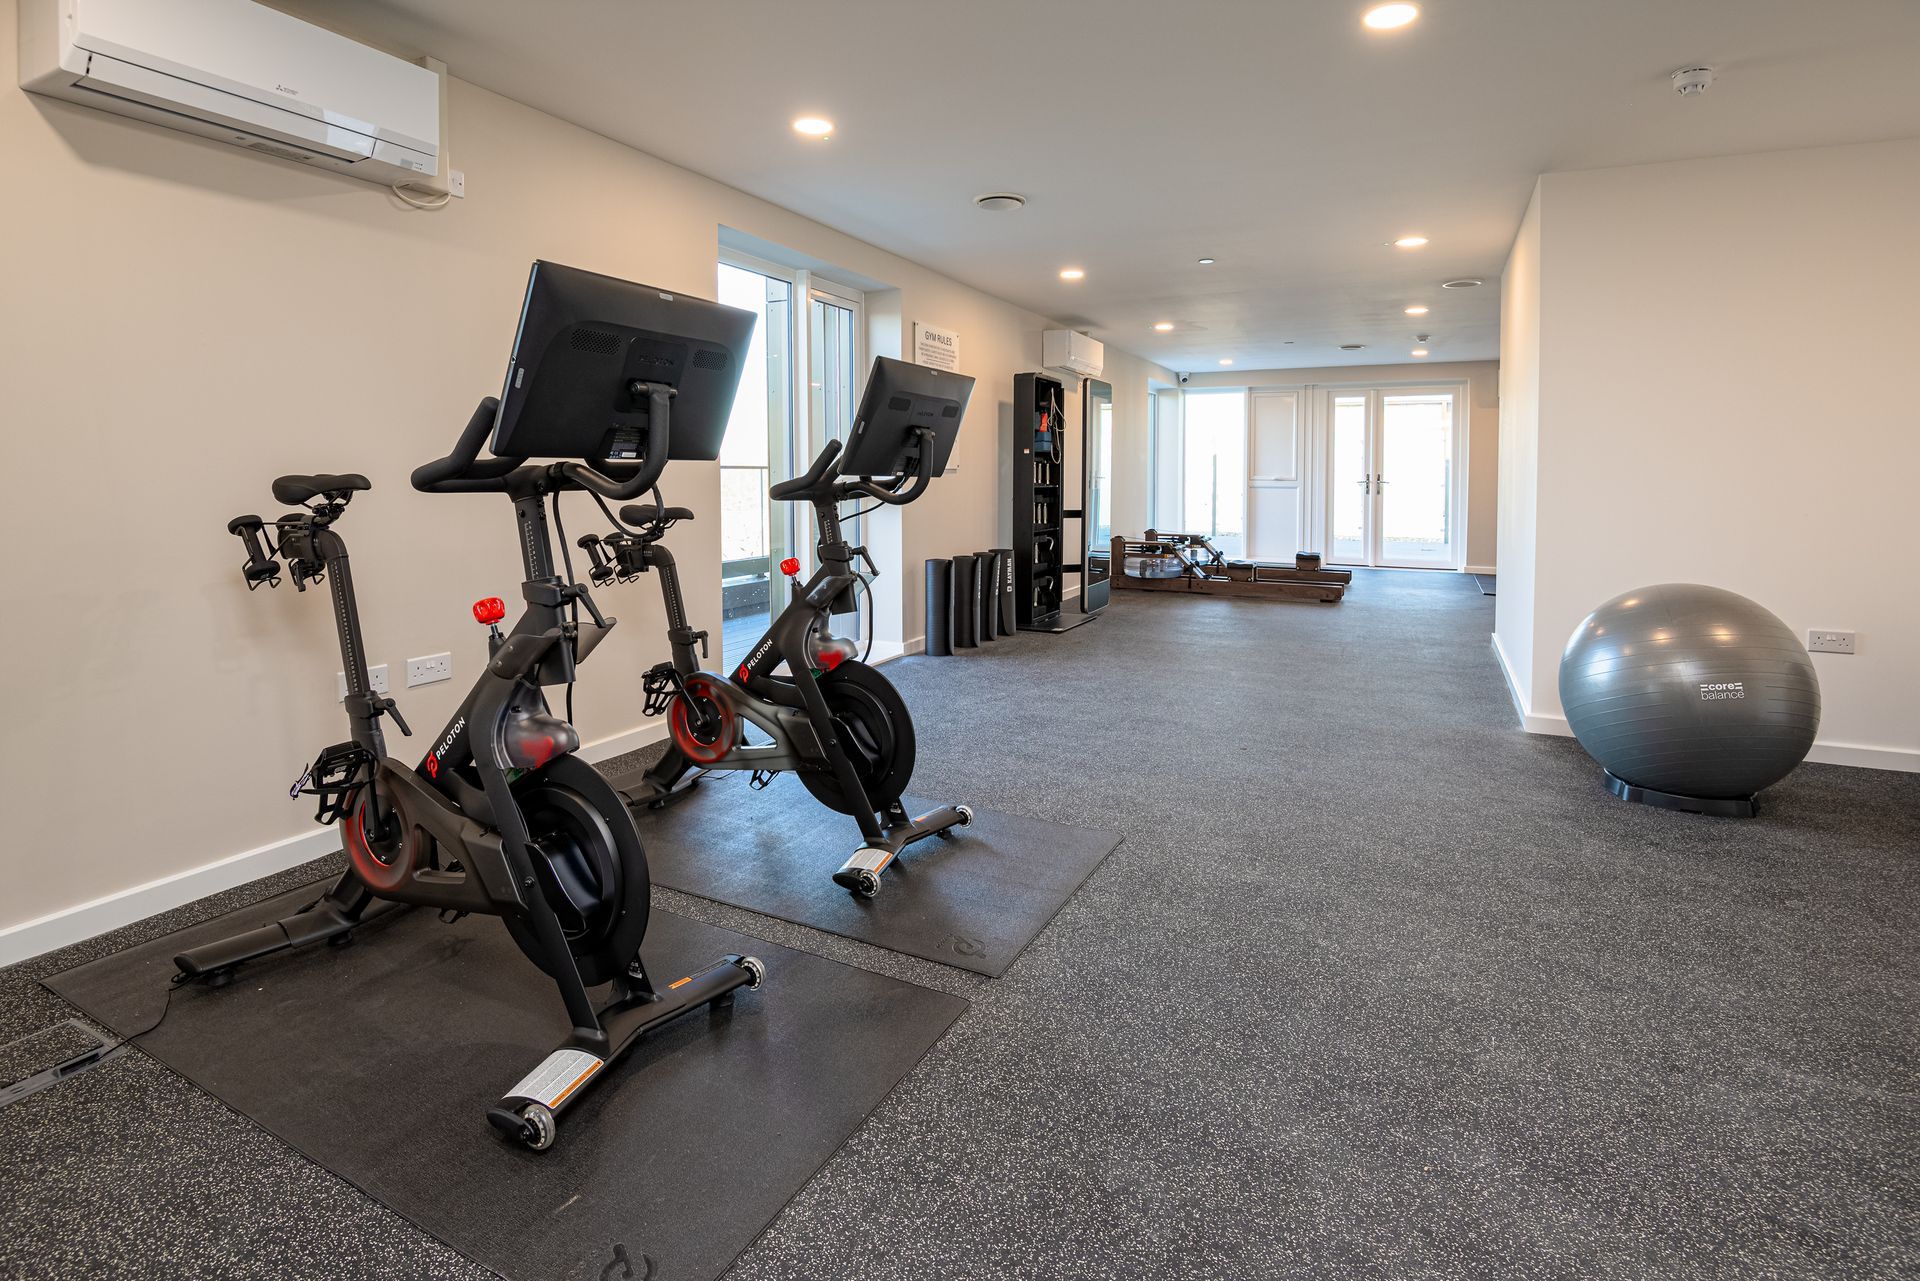 A gym with two exercise bikes and a pilates ball at Walton Court.